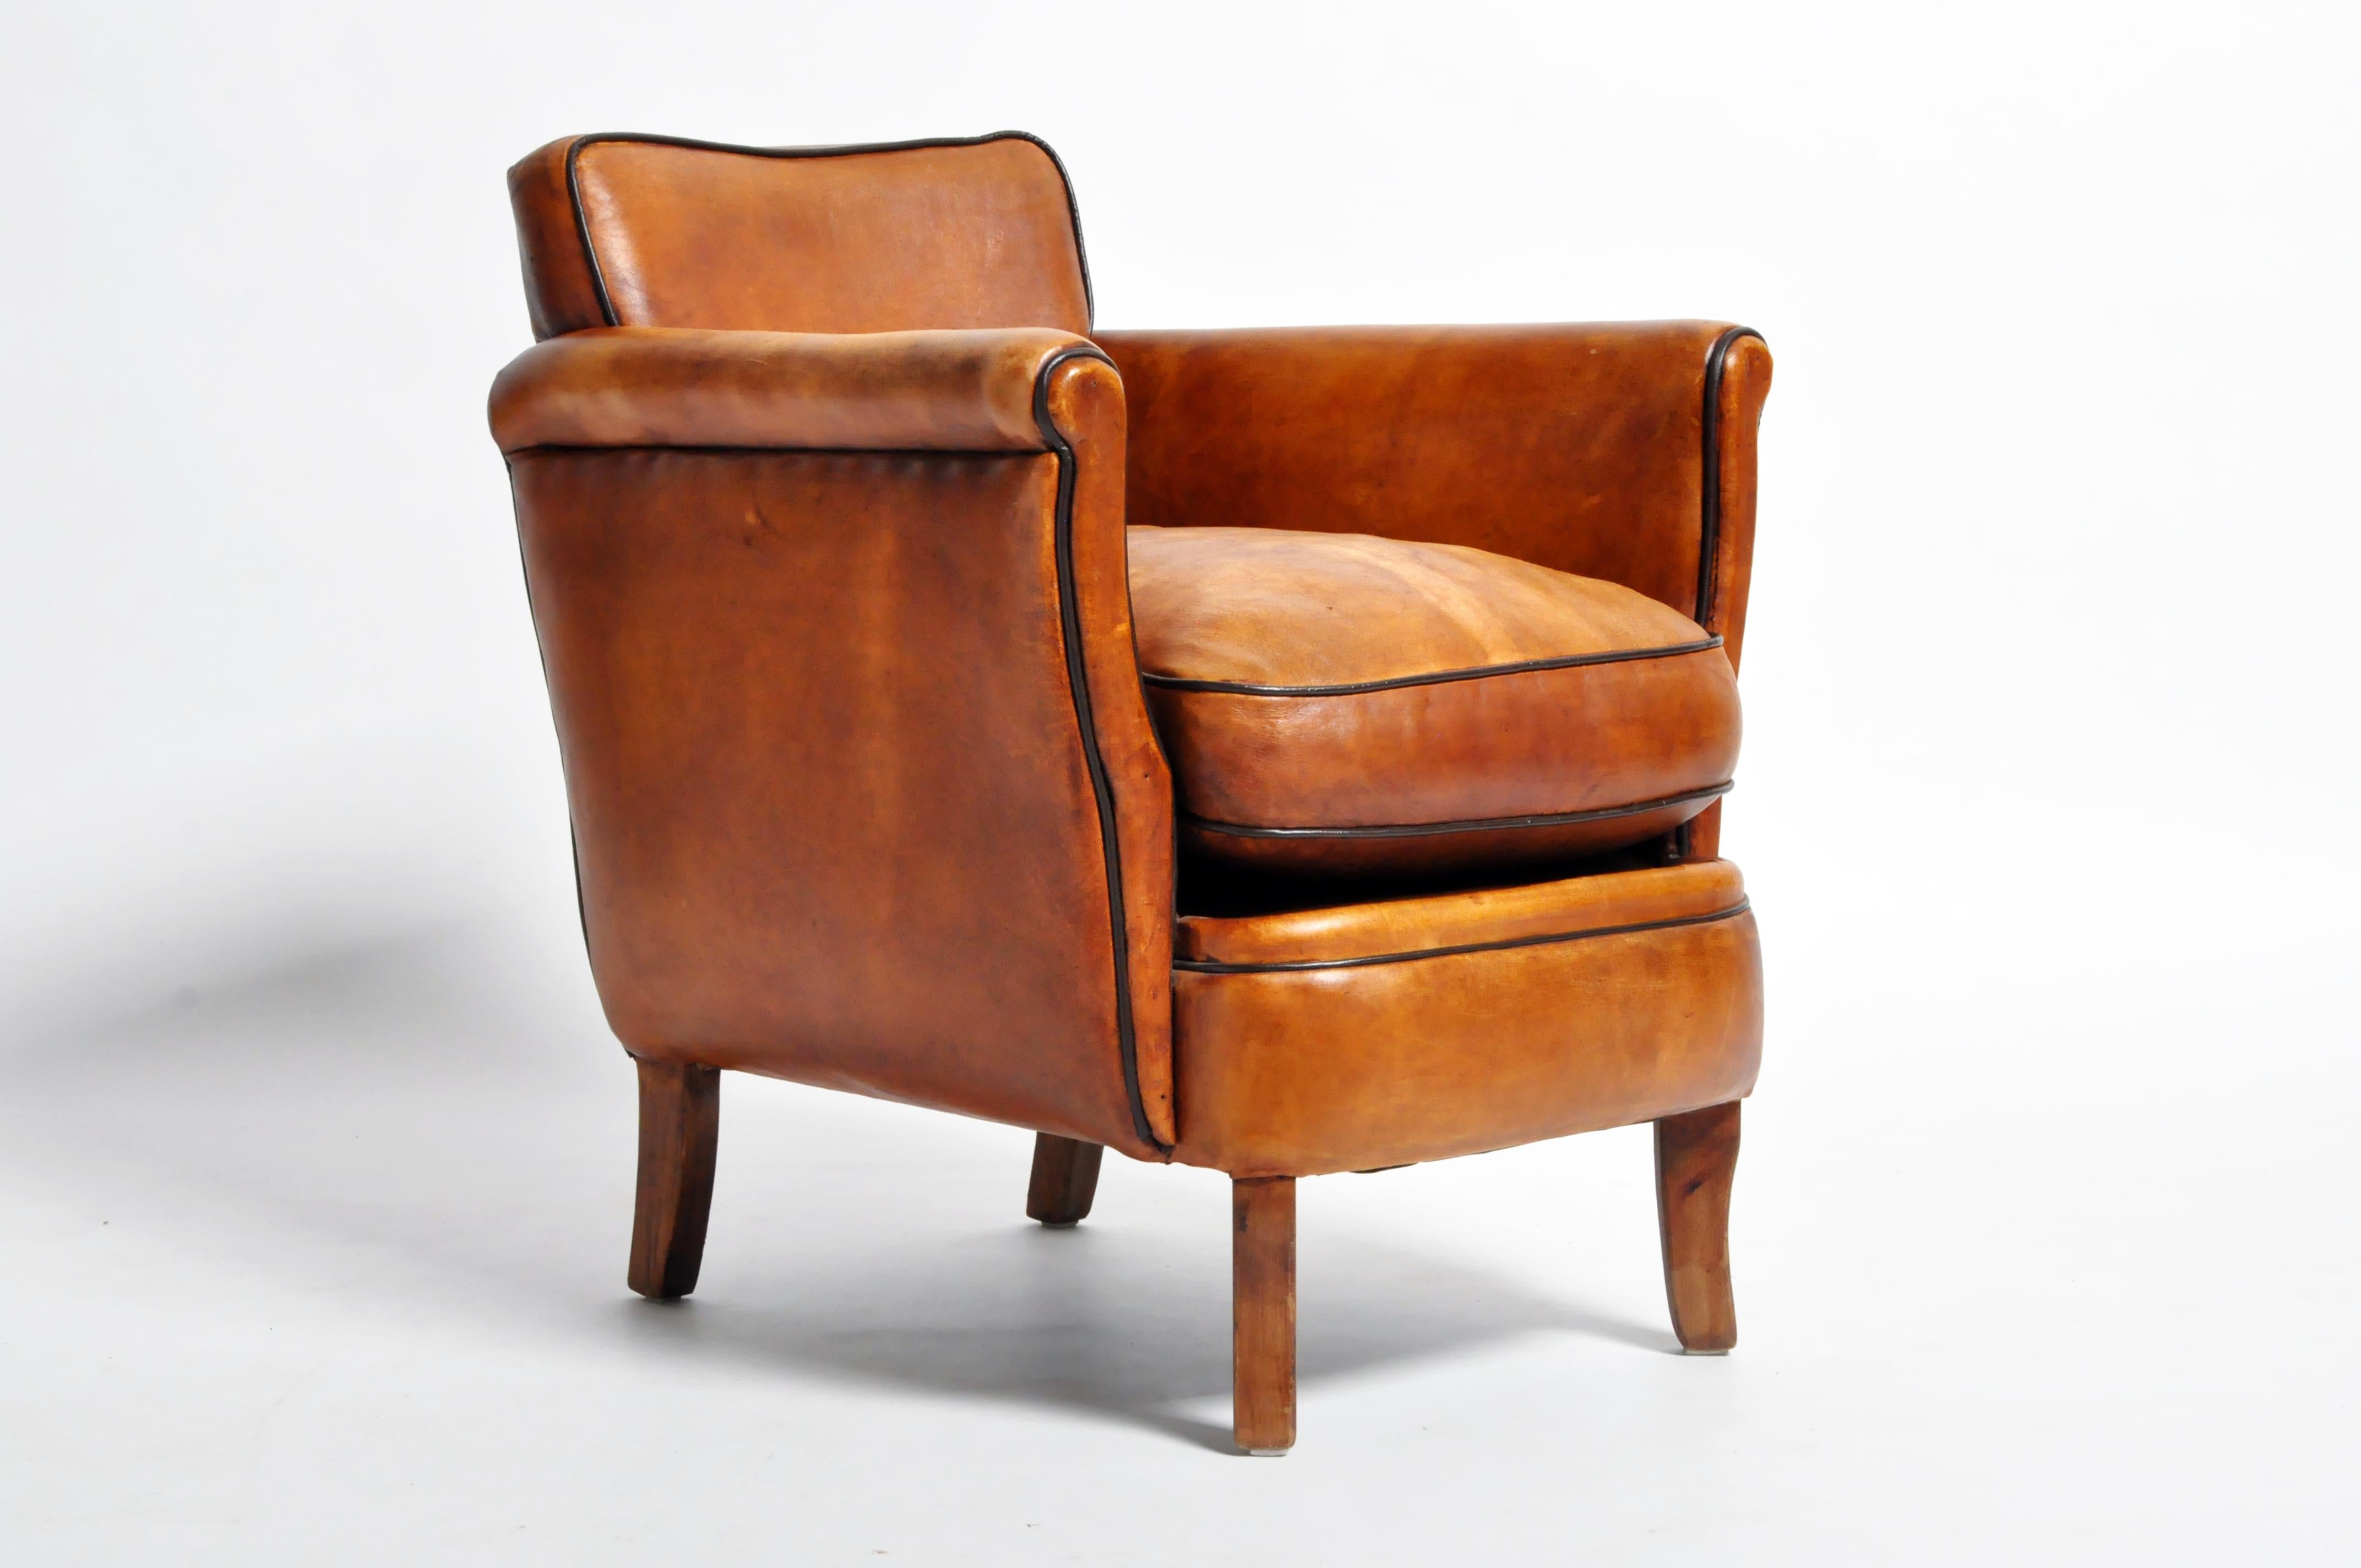 This newly made brown armchair is from France and made from leather and wood. Comfortable and sturdy, ready for daily use.